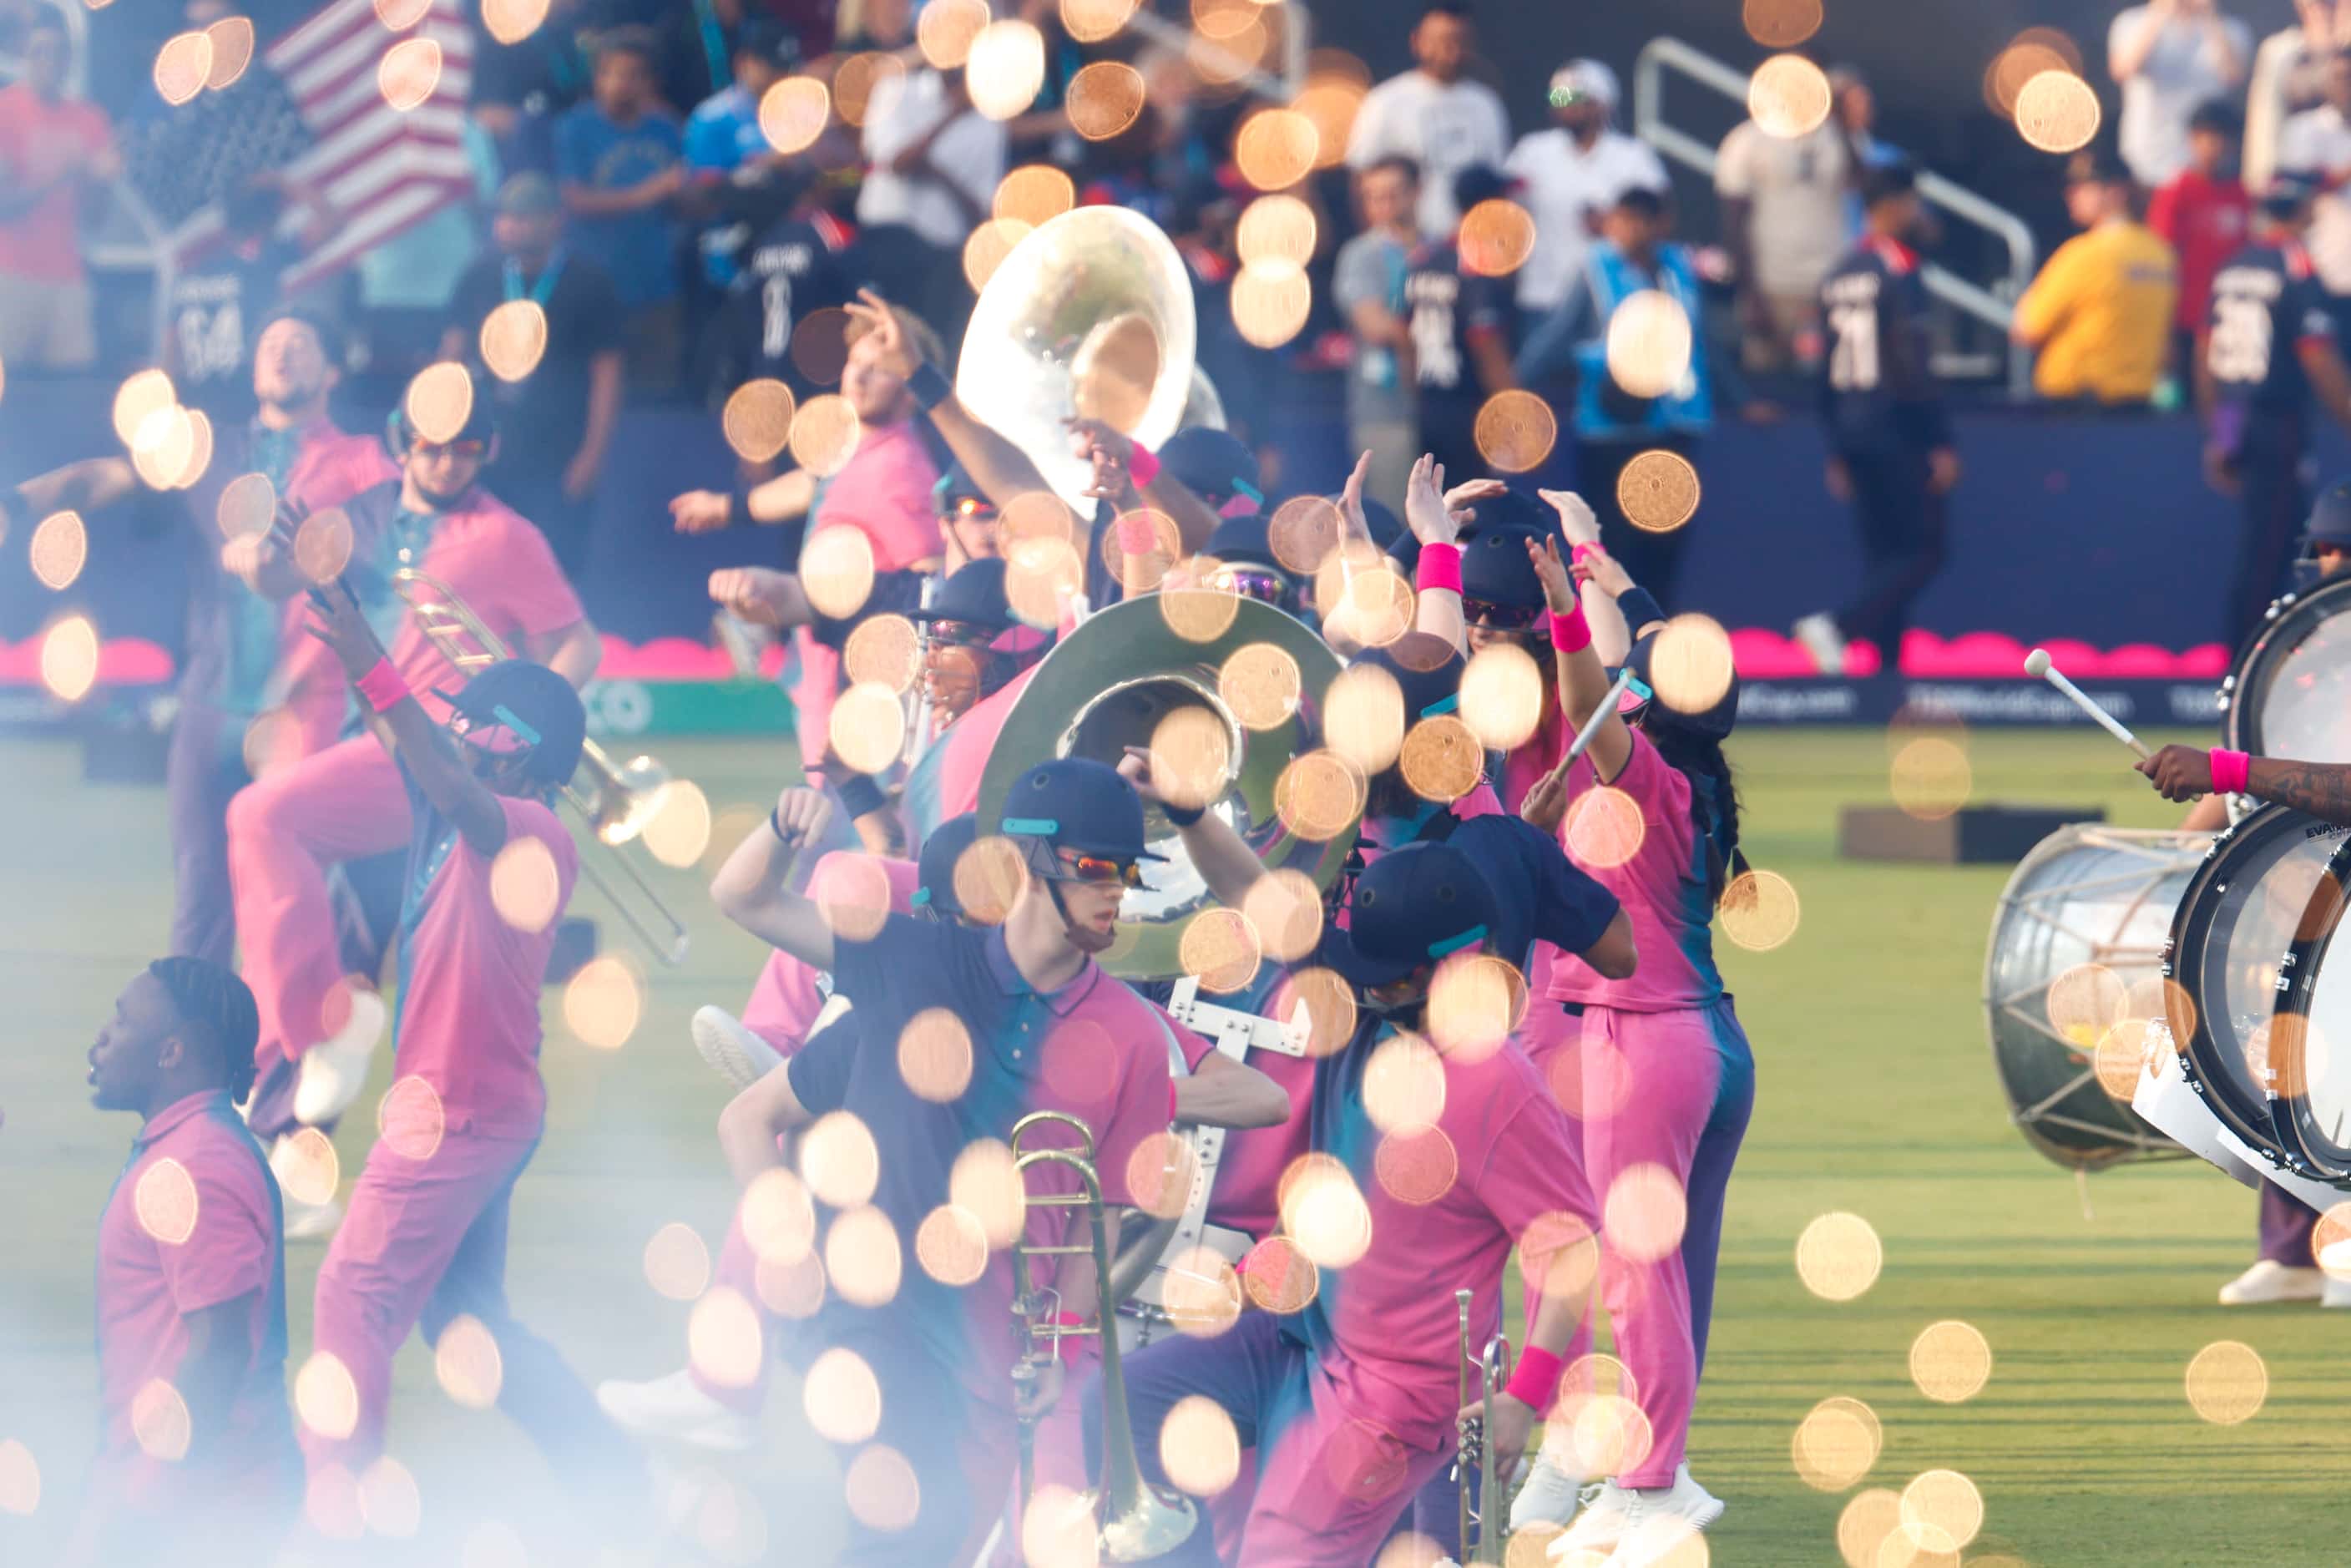 Performers take part in the opening ceremony of men's T20 World Cup cricket match between...